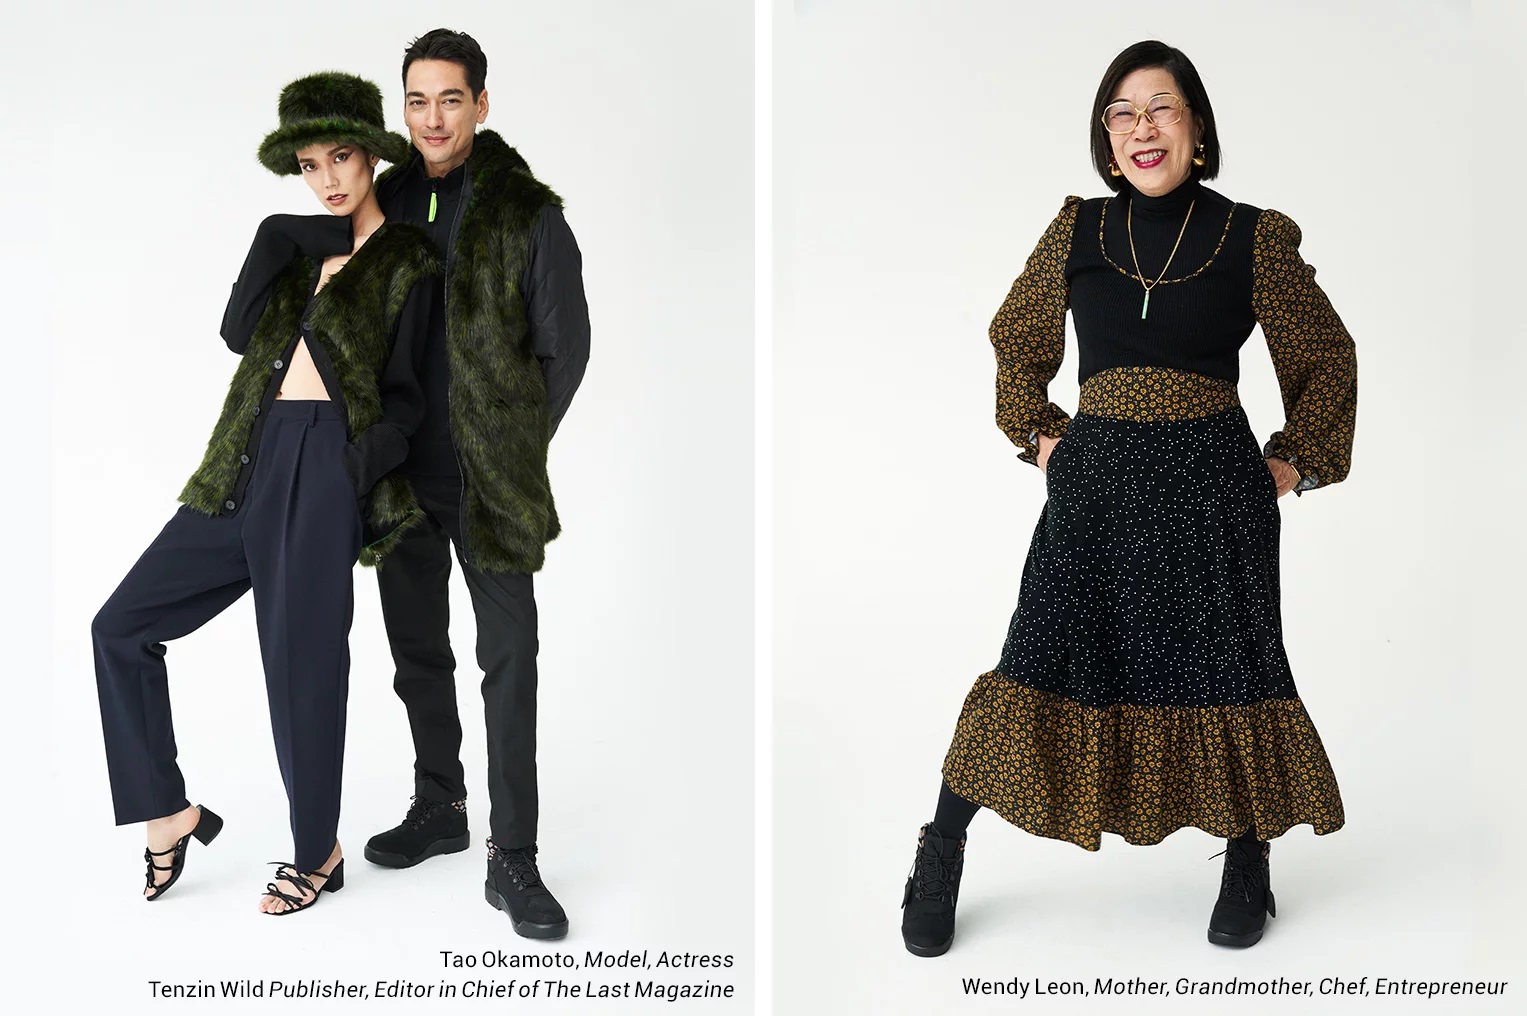 opening ceremony fall winter 2019 lookbook features an all-asian cast inspired by hong kong icons anita mui and leslie cheung - 03.jpg